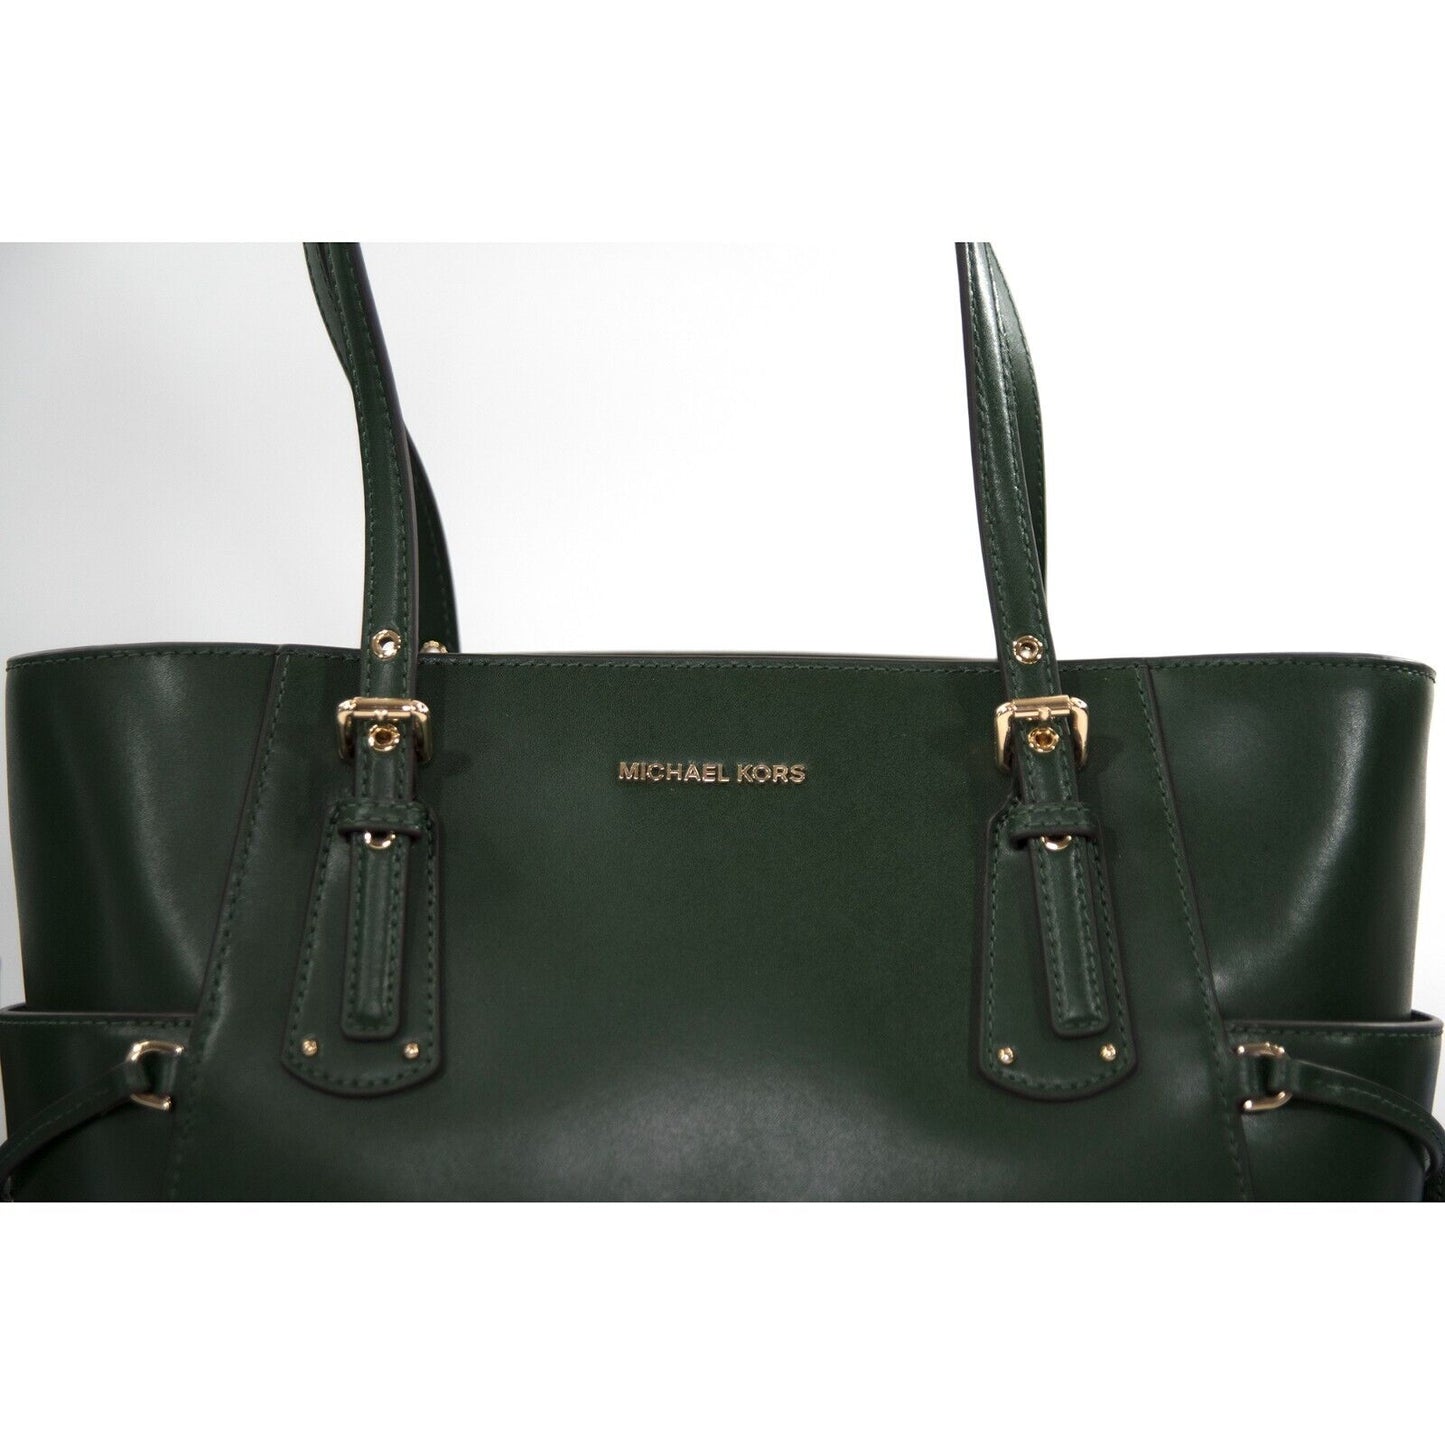 Michael Kors Moss Green Leather Voyager Medium Tote Bag NWT